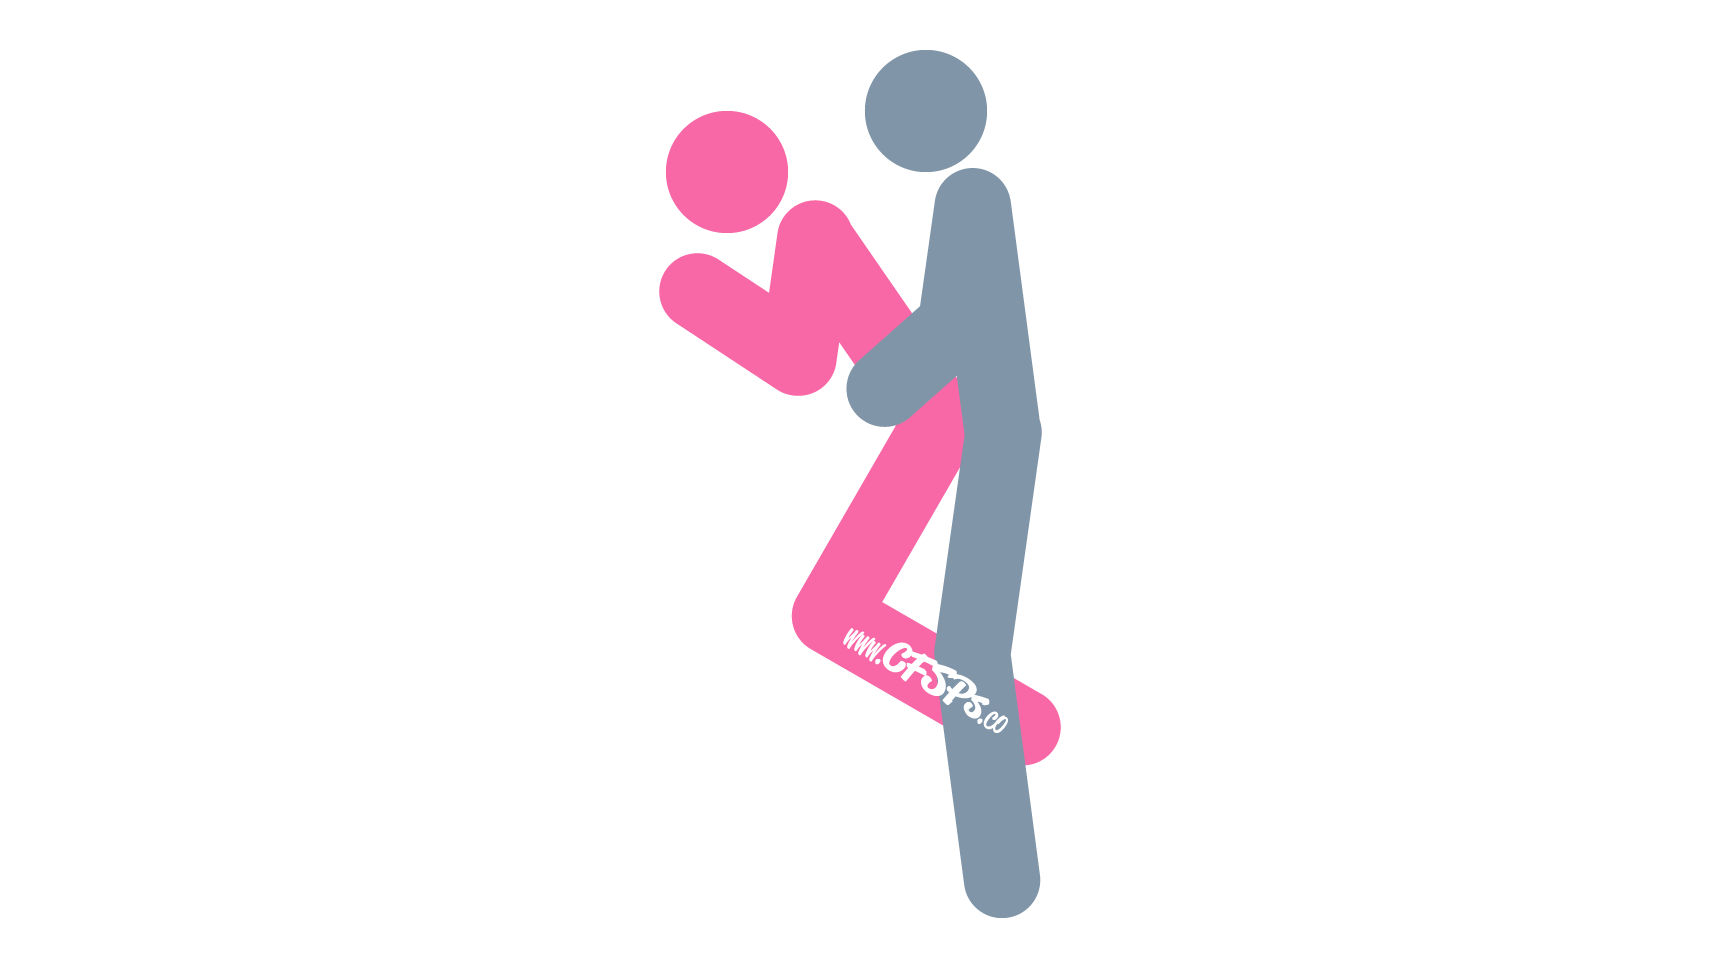 This stick figure image depicts a man and woman having sex in the Rear-Ender sex position. The woman is positioned on the sofa or recliner with her knees on the edge of the seat cushion and her forearms on the top of the backrest. The man is standing behind her between her legs with his arms wrapped around her waist.